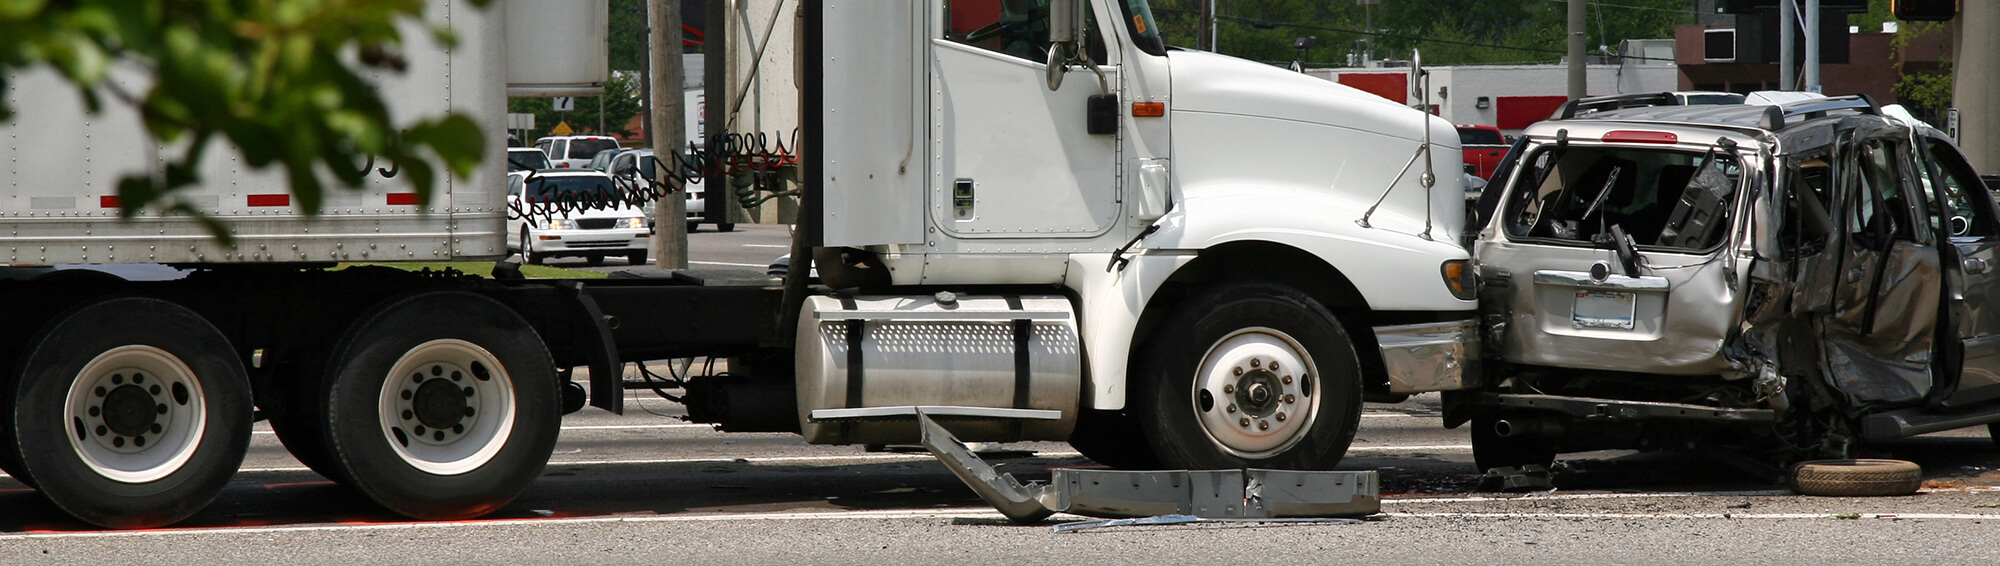 Holiday Shopping May Lead to Trucking Accidents